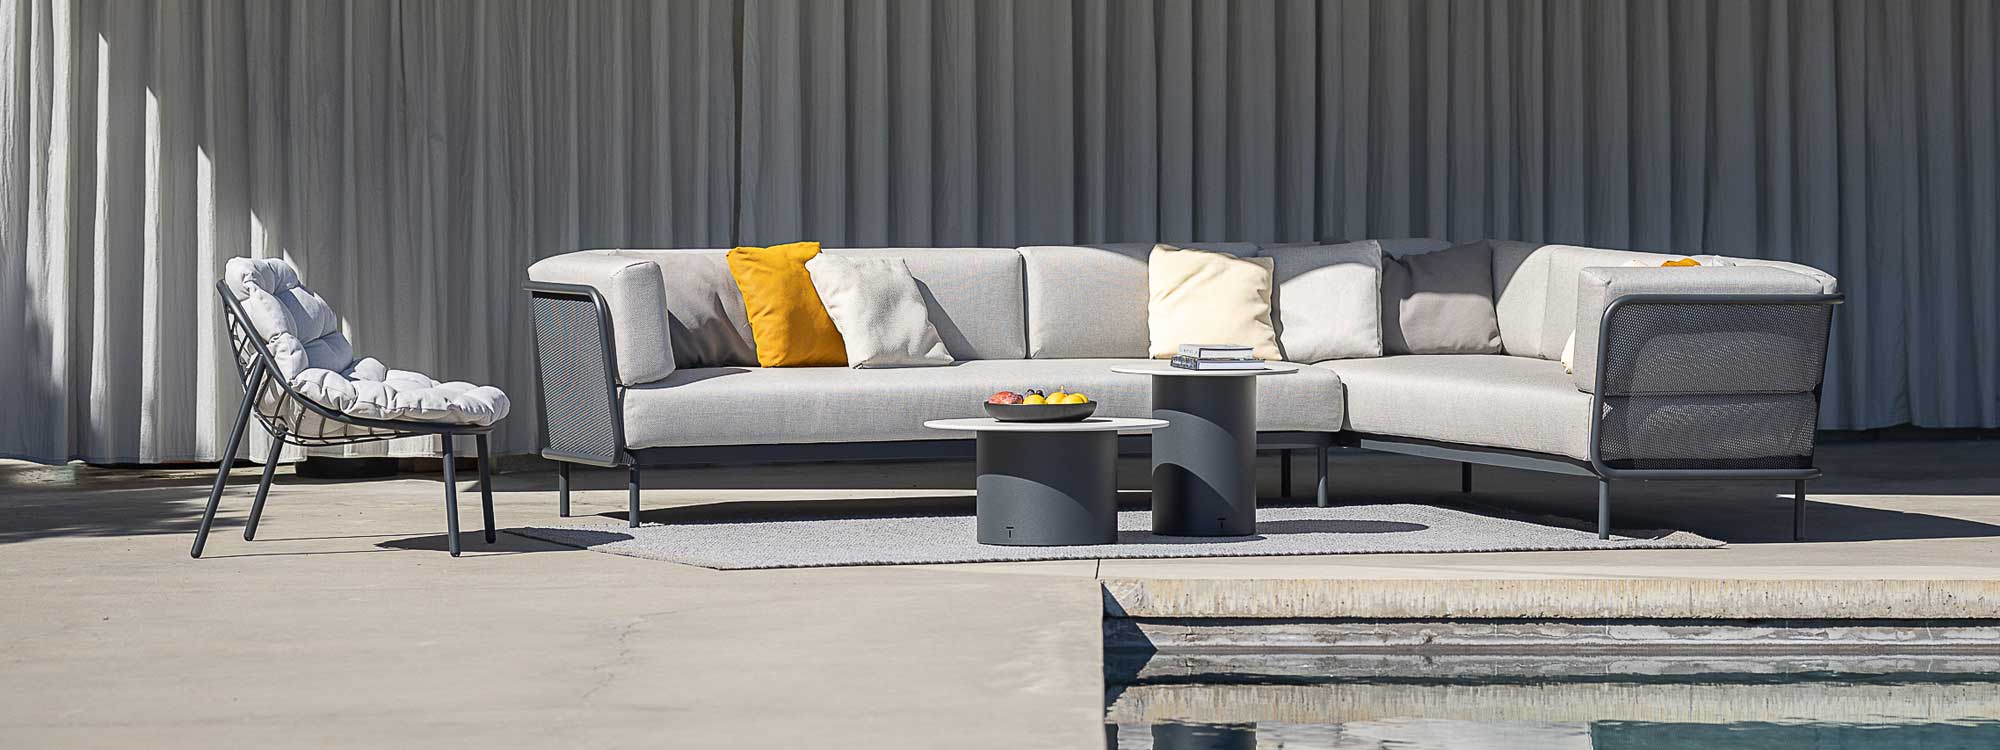 Image of Albus low backed garden relax chair and Baza modern garden corner sofa and Branta low tables, shown on sunny terrace